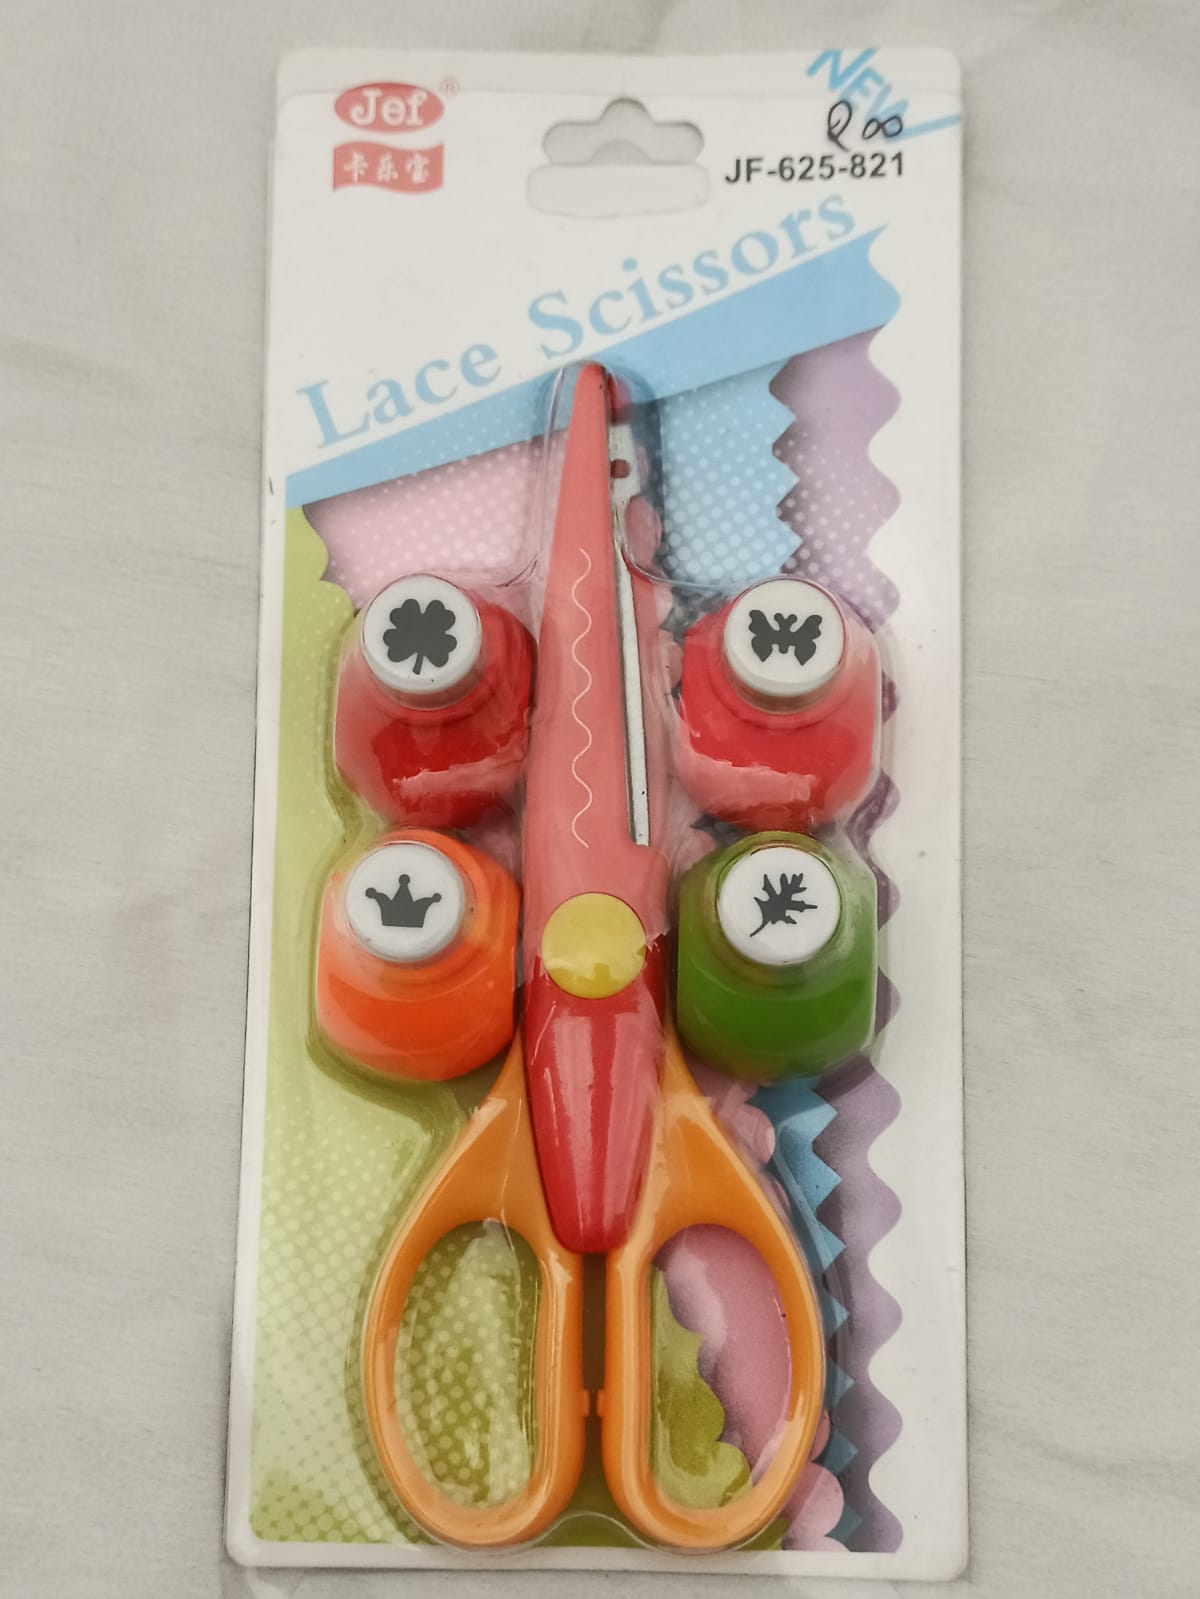 Lace Scissors with Stamp